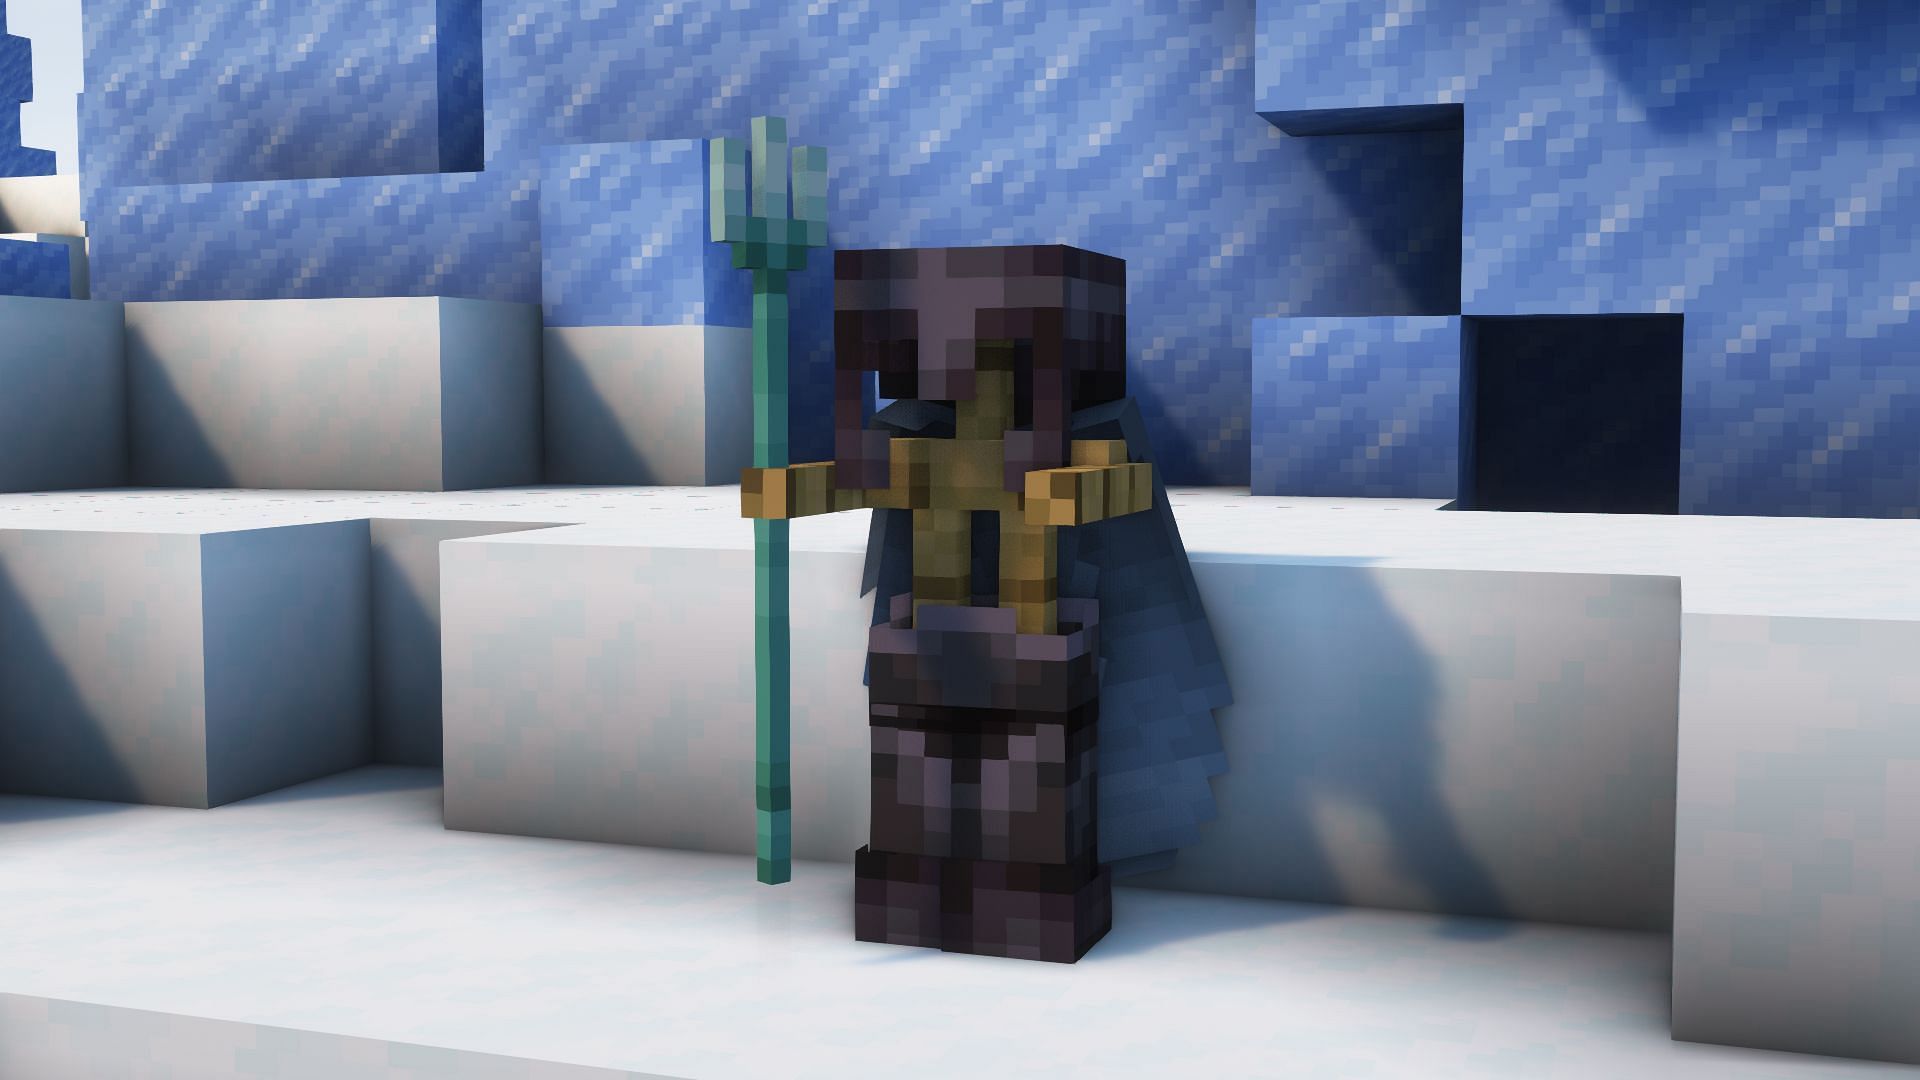 An armor stand in Minecraft (Image via Mojang)